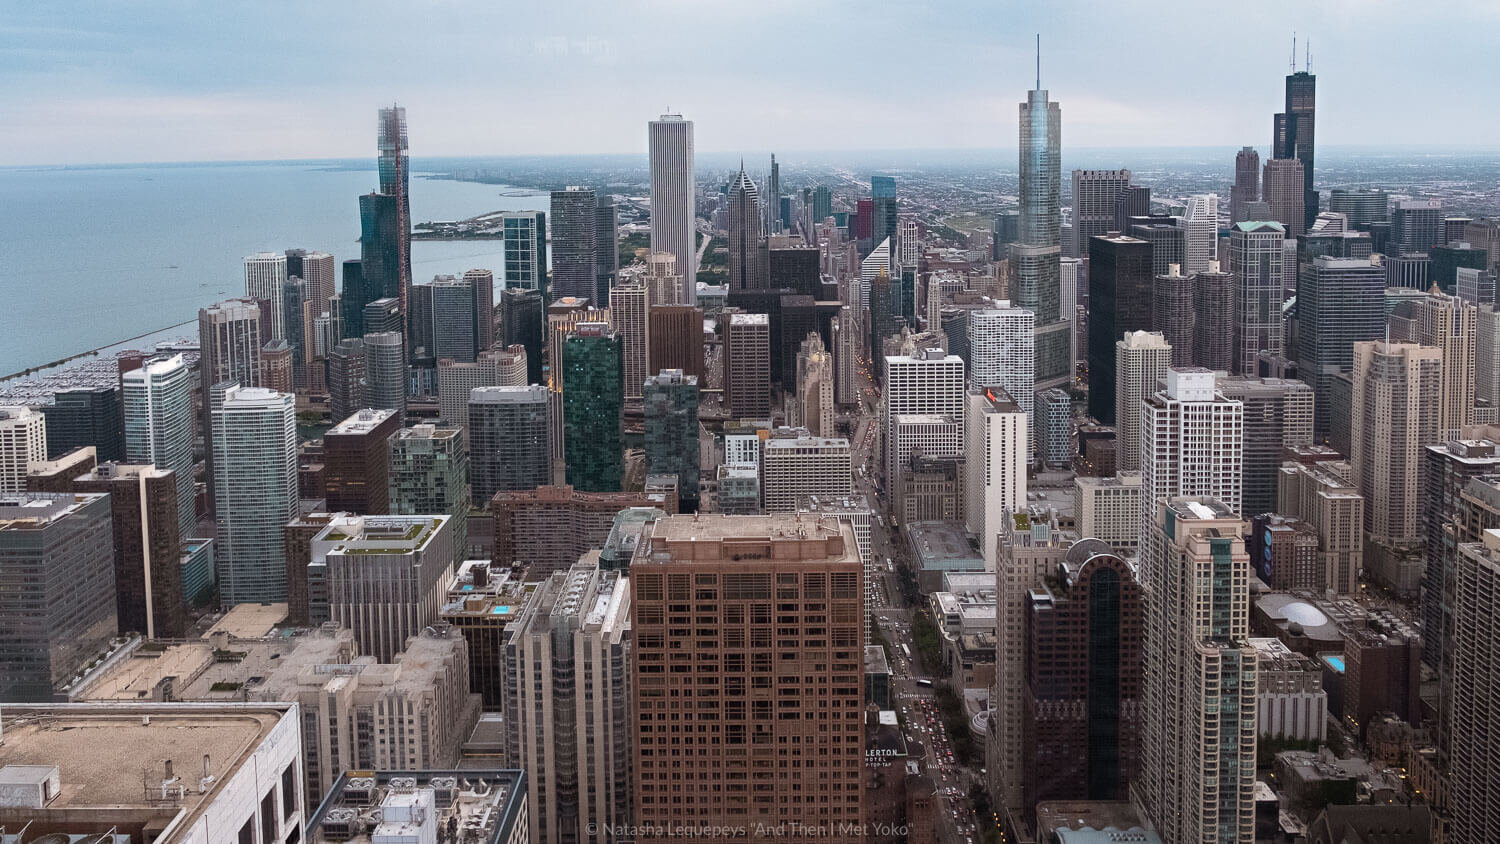 Views from 360 Chicago Observation Deck, Chicago, USA. Travel photography and guide by © Natasha Lequepeys for "And Then I Met Yoko". #chicago #usa #travelblog #travelphotography